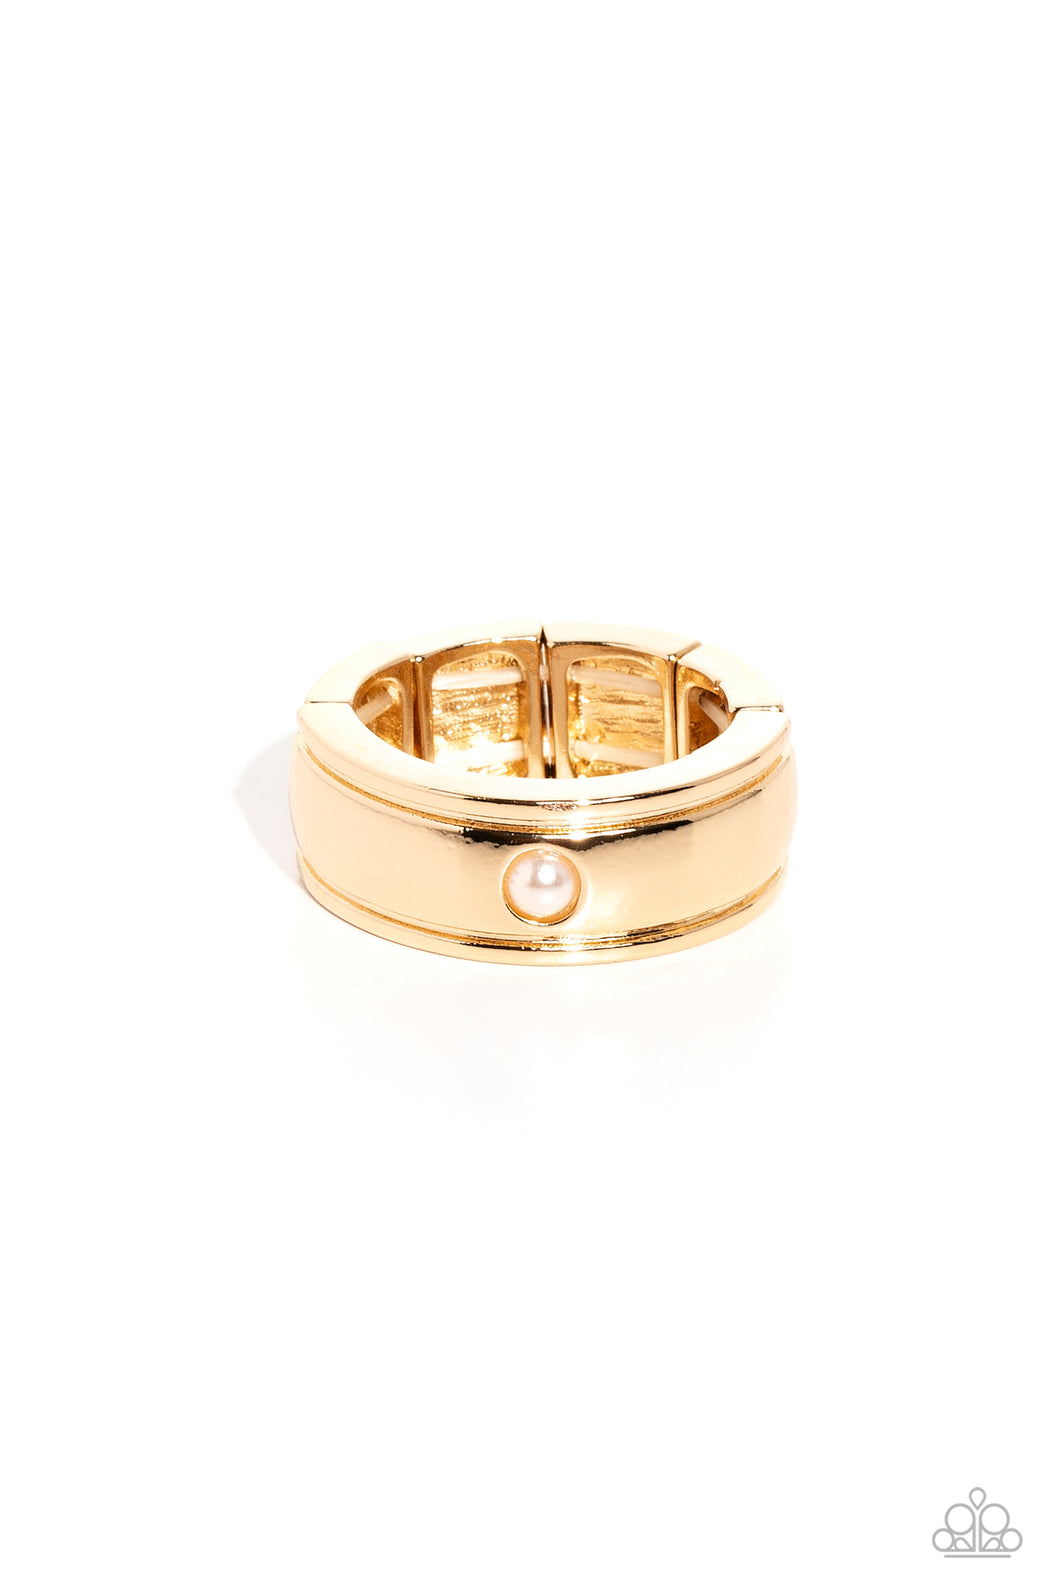 Seize the Sophistication - Gold (White bPearl center) Ring